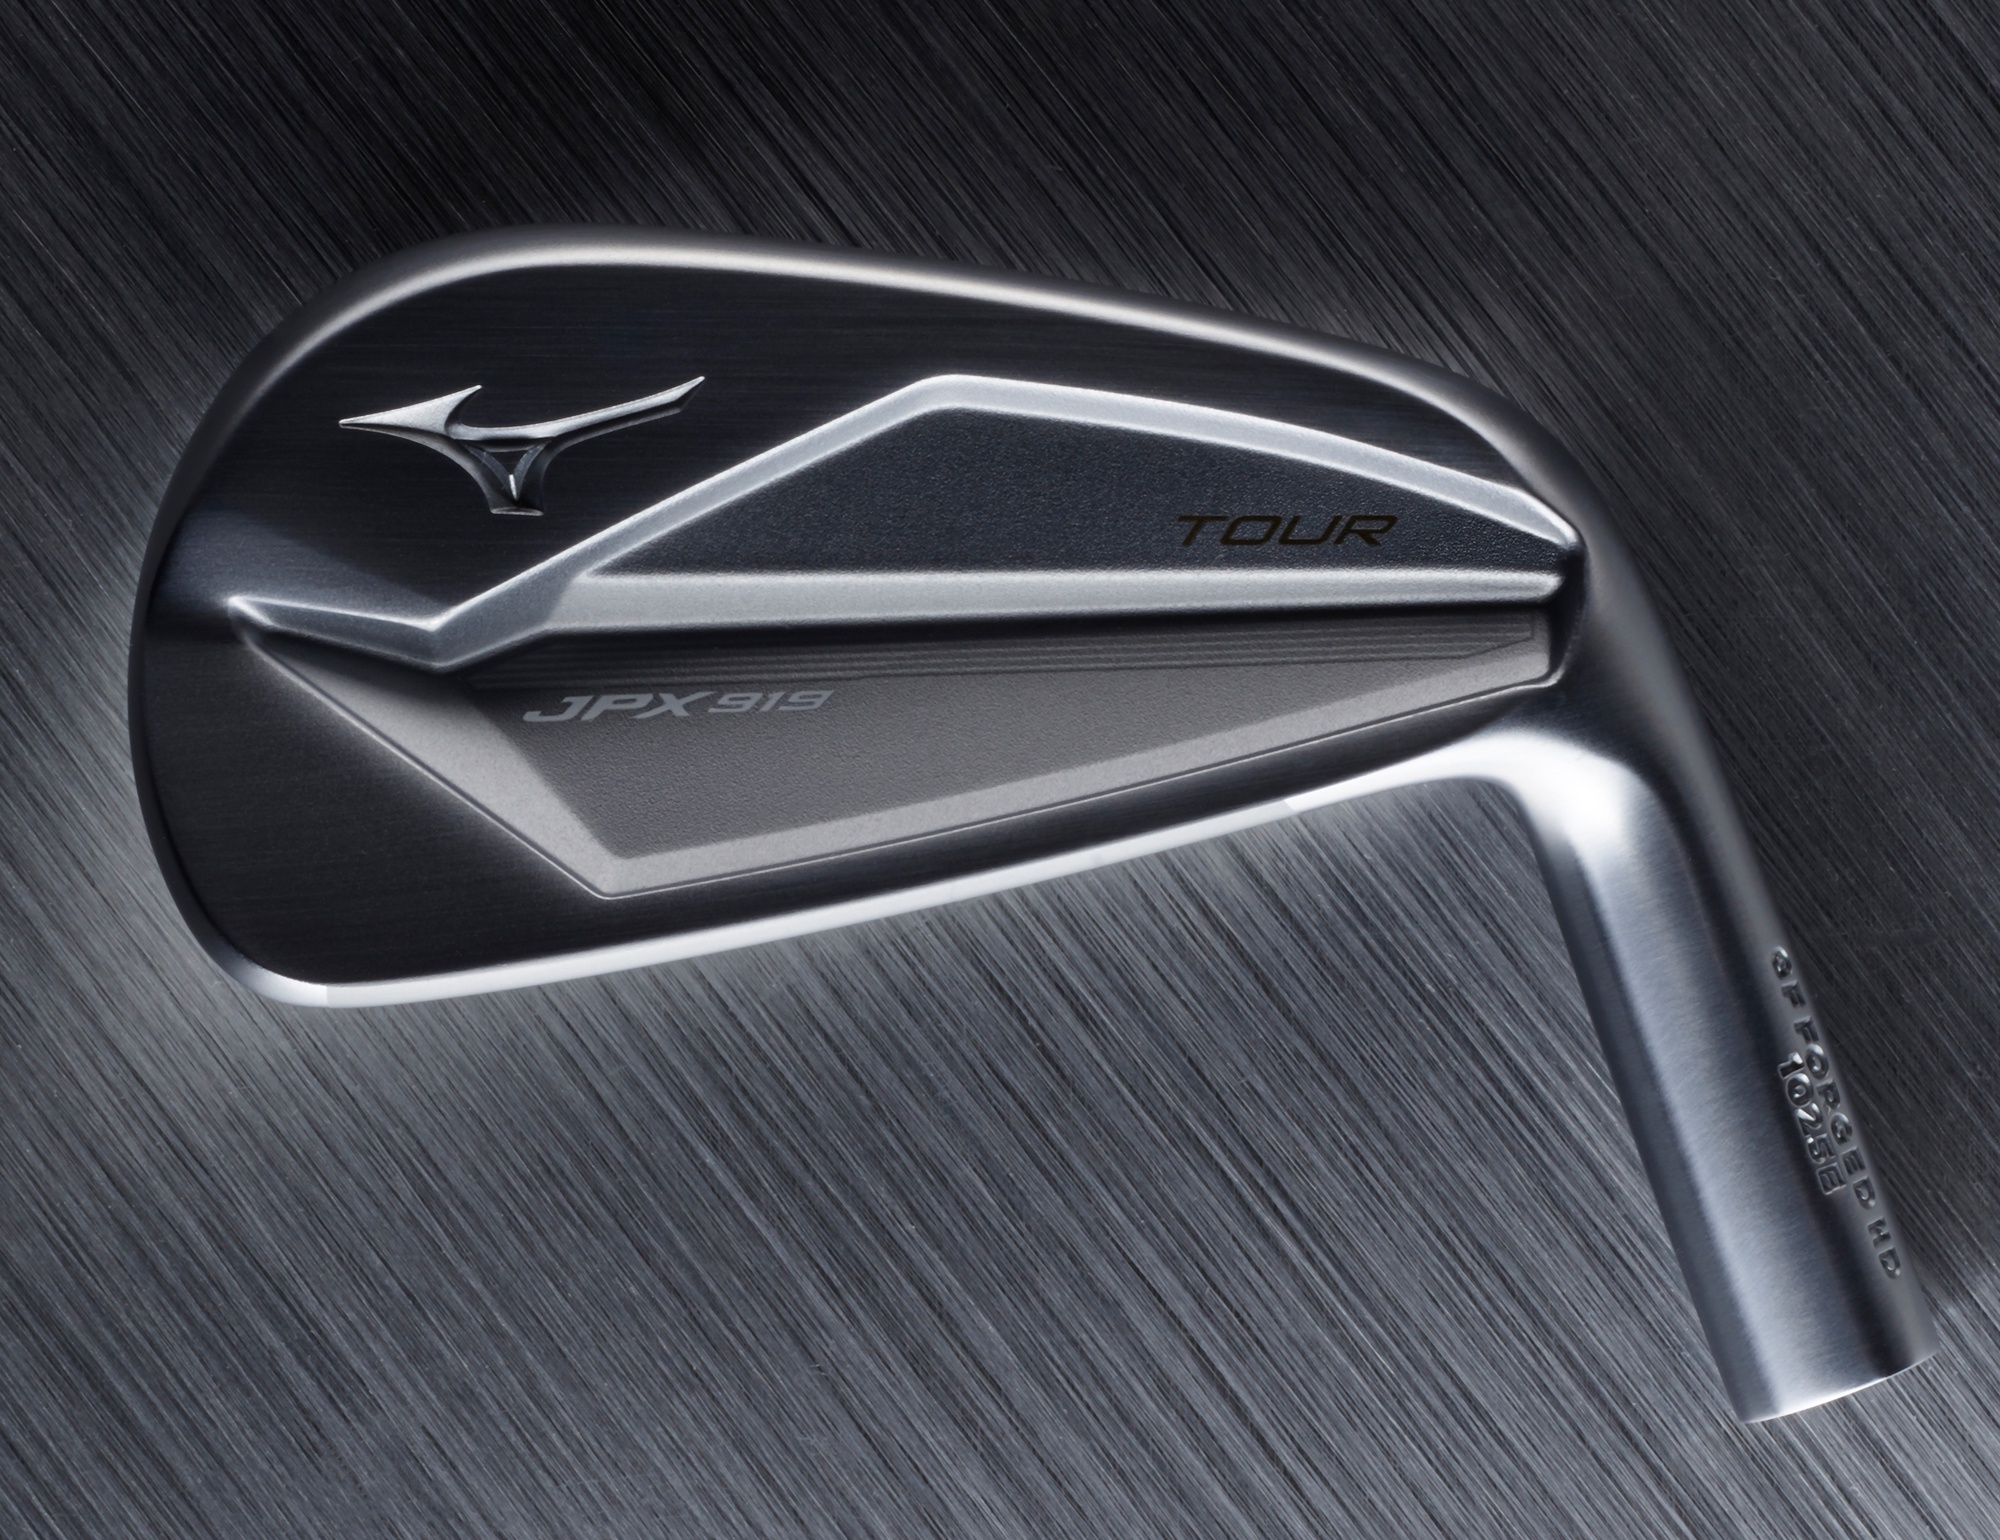 mizuno 919 forged review